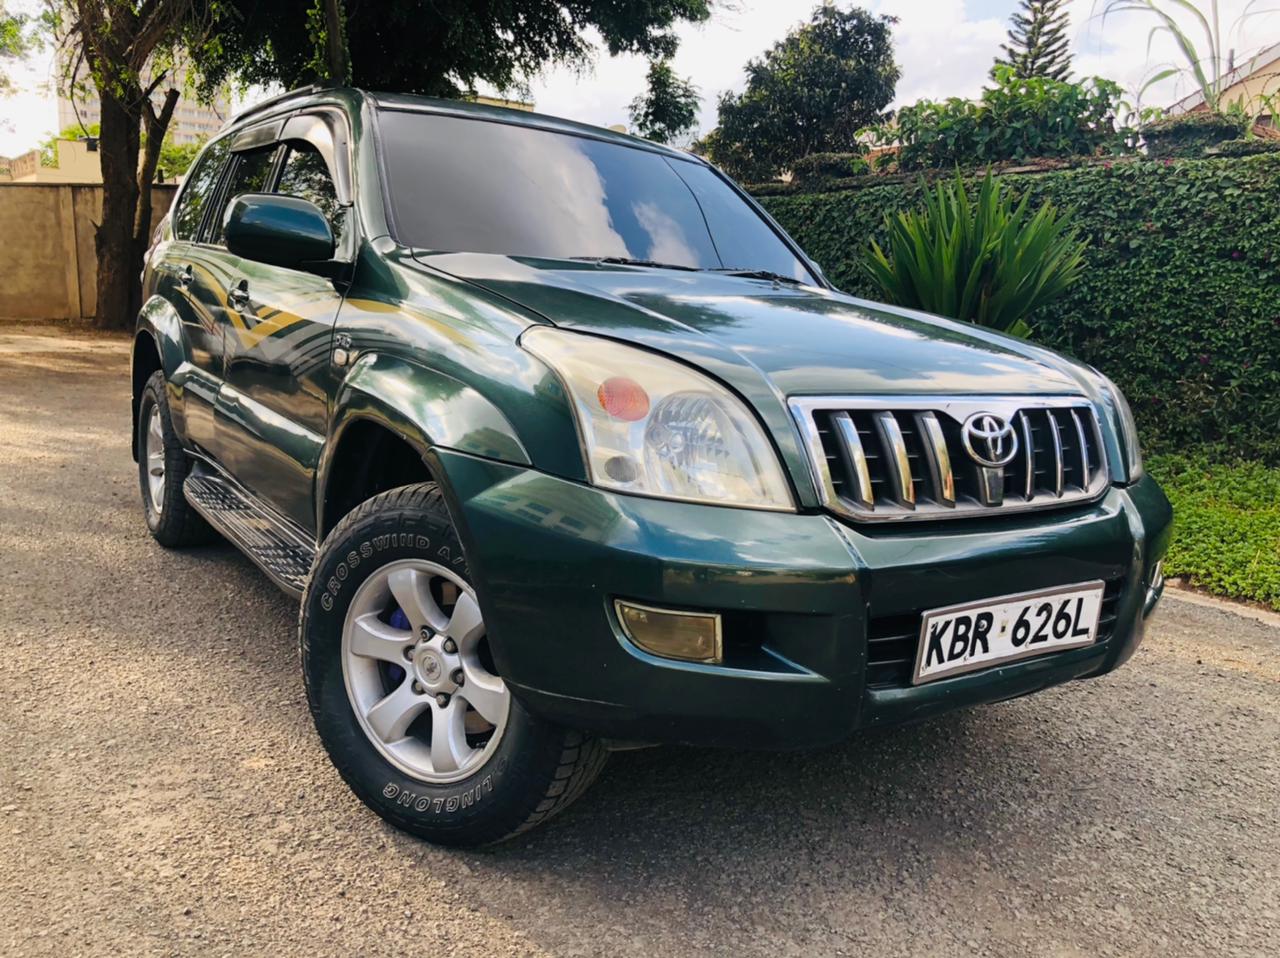 Cars Cars For Sale/Vehicles SUV-Toyota Prado 2005 Sunroof Leather Diesel Pay 20% Deposit 8